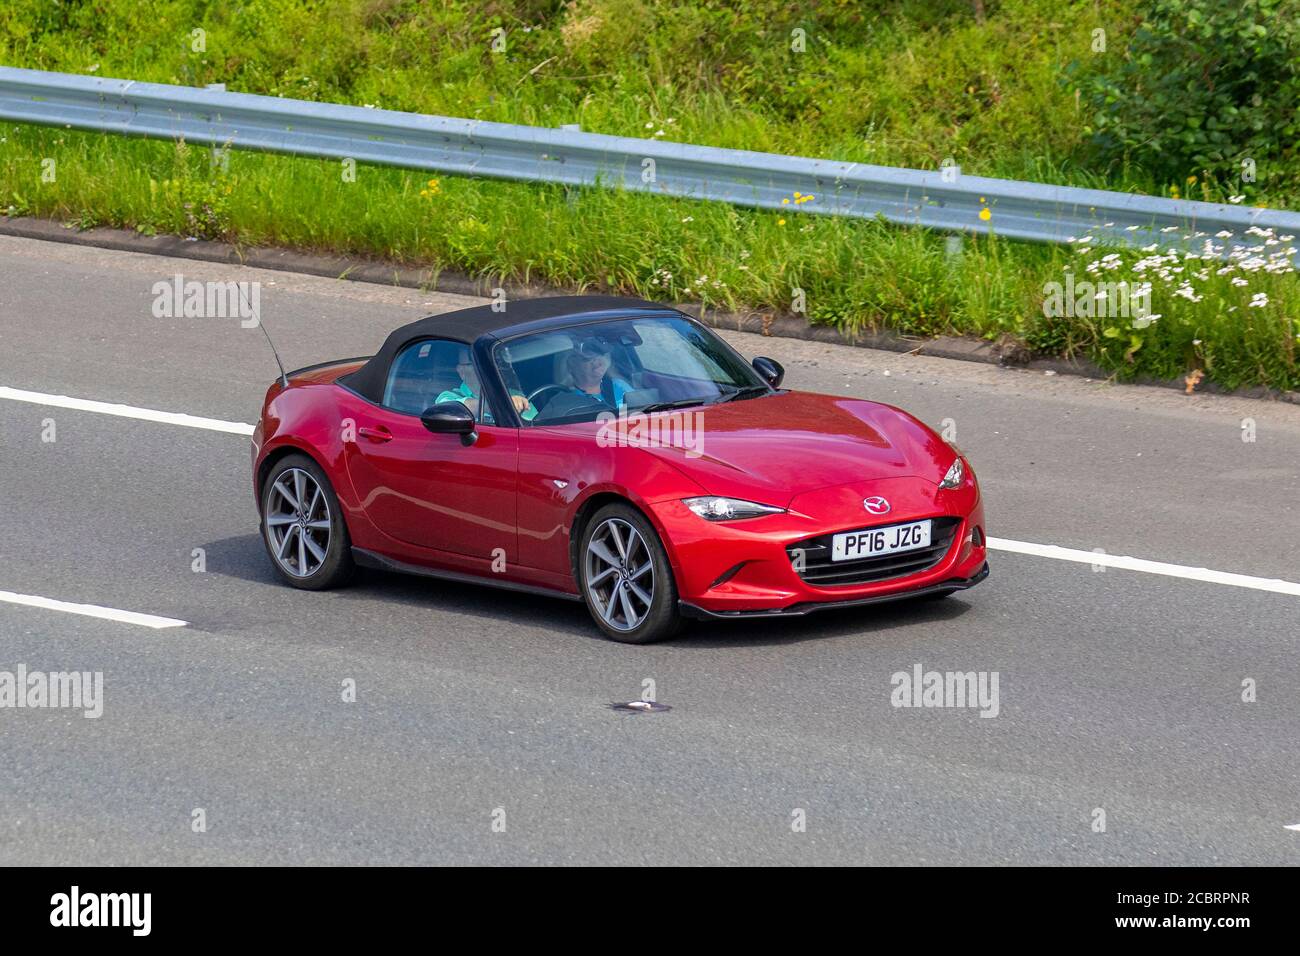 2016 Mazda Red Mx-5 Sport Recaro the most expensive version of Mazda's roadster ; Vehicular traffic moving vehicles, cars driving vehicle on UK roads, motors, motoring on the M6 motorway highway network. Stock Photo